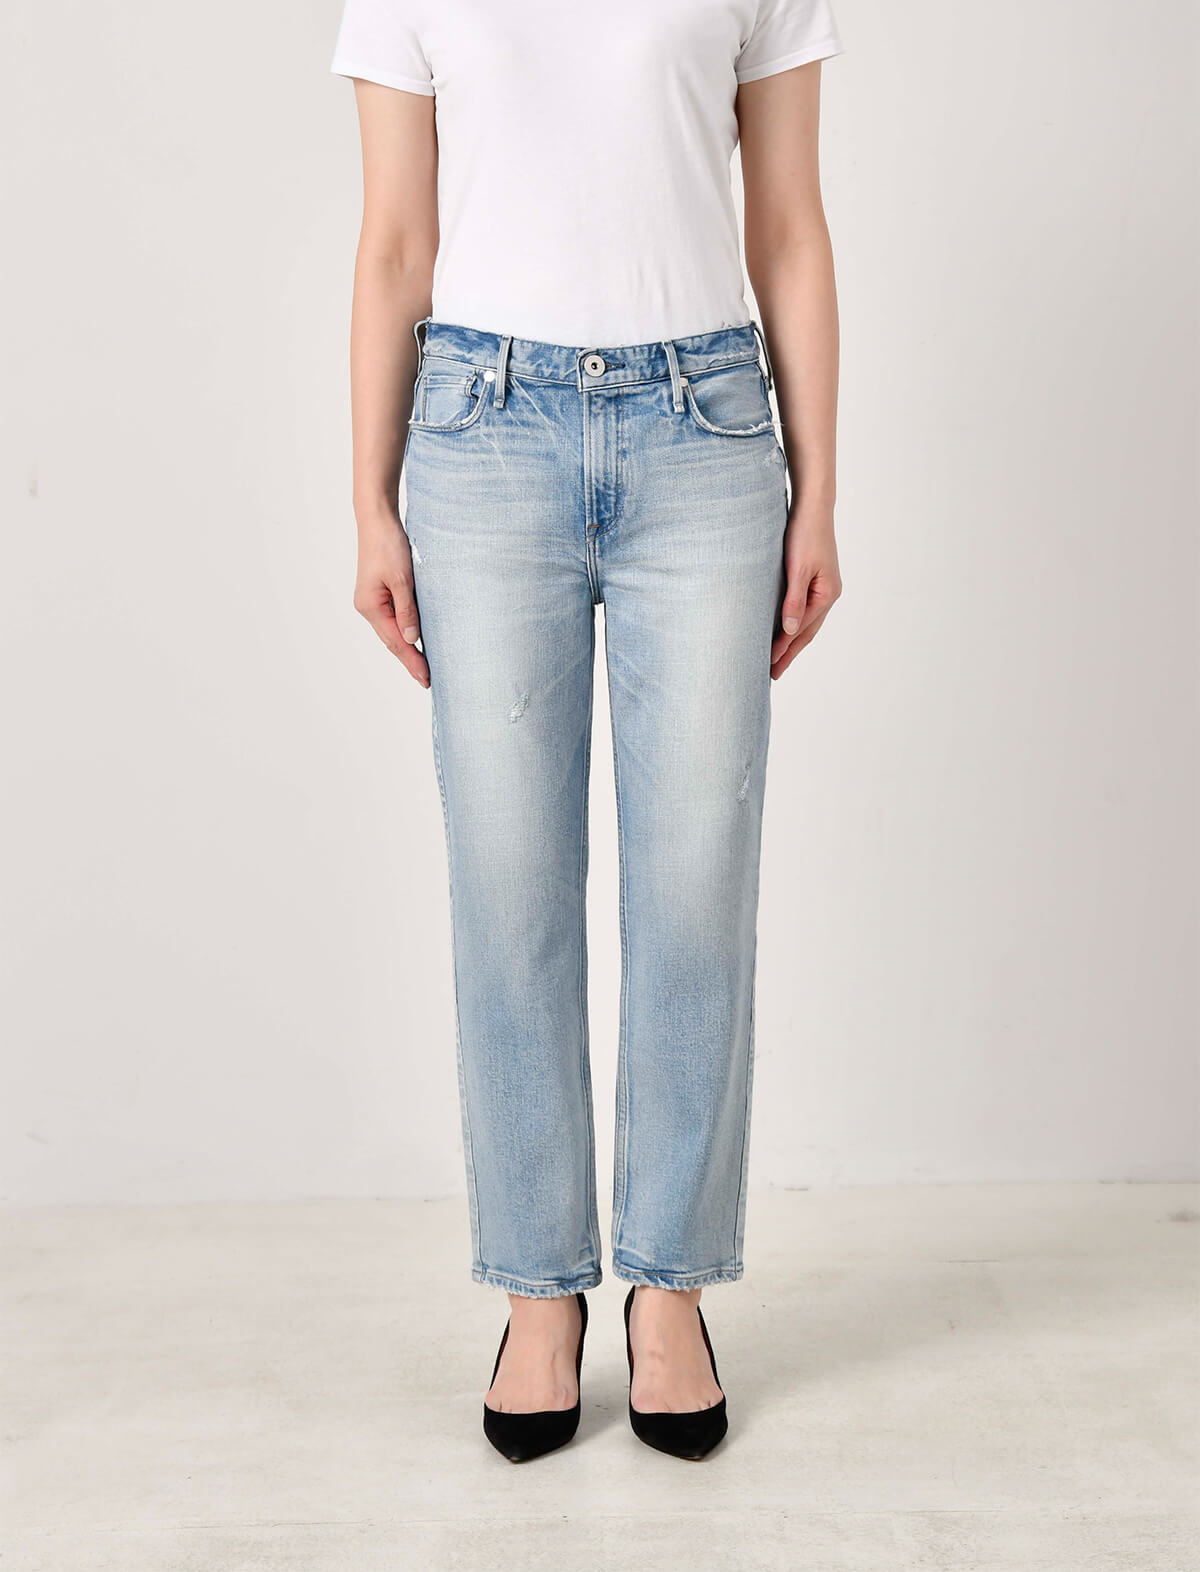 UPPER HIGHTS The Girl Midrise Tapered Jeans In Surf